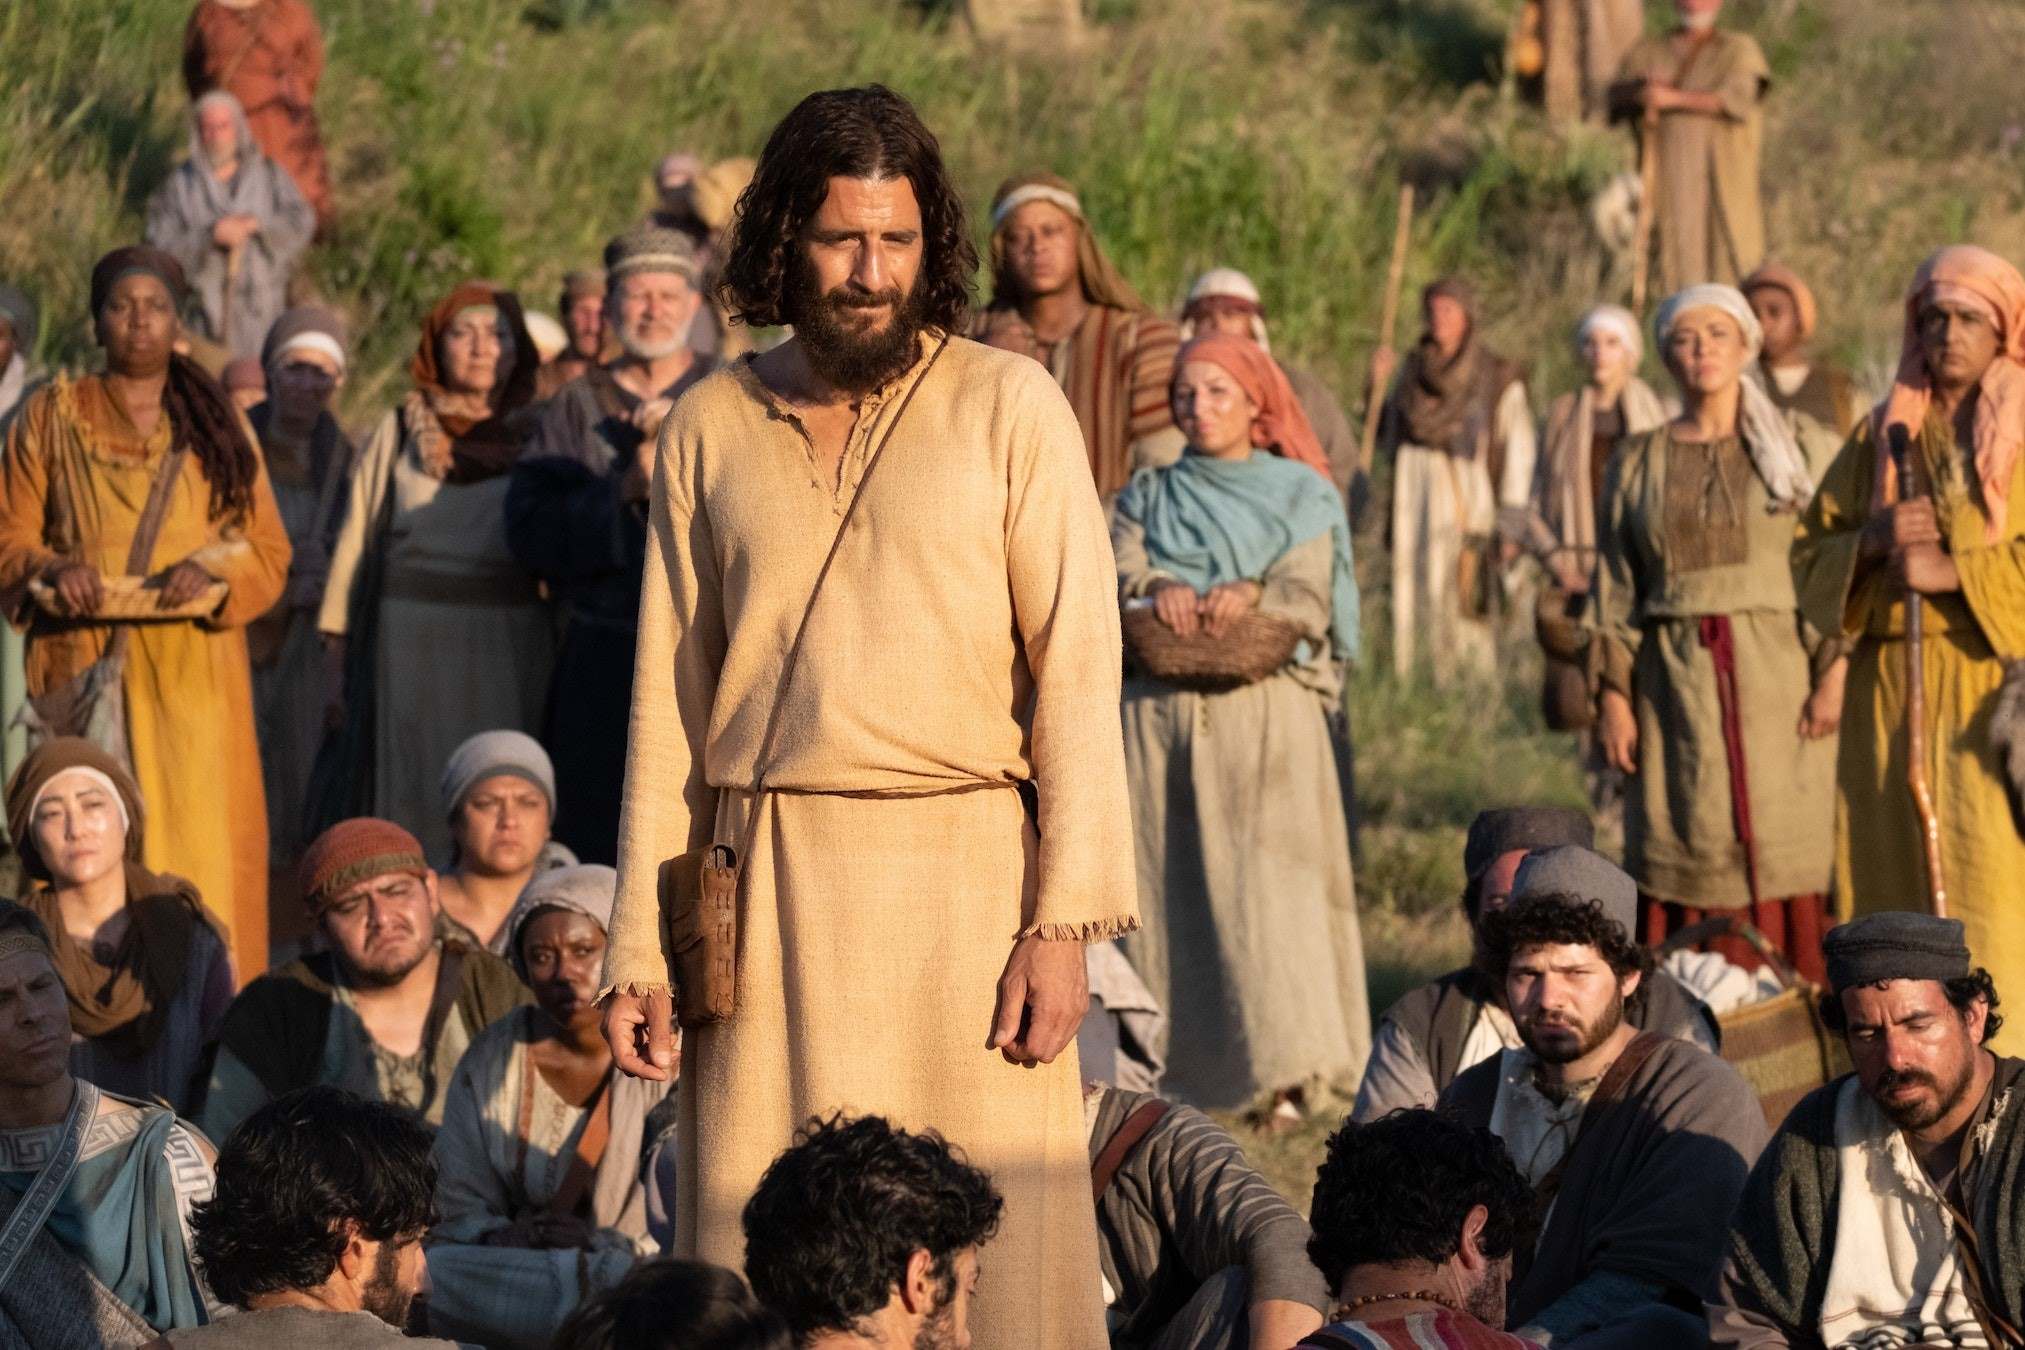 The Surprising Myers-Briggs Personality Type Of Jesus Revealed!